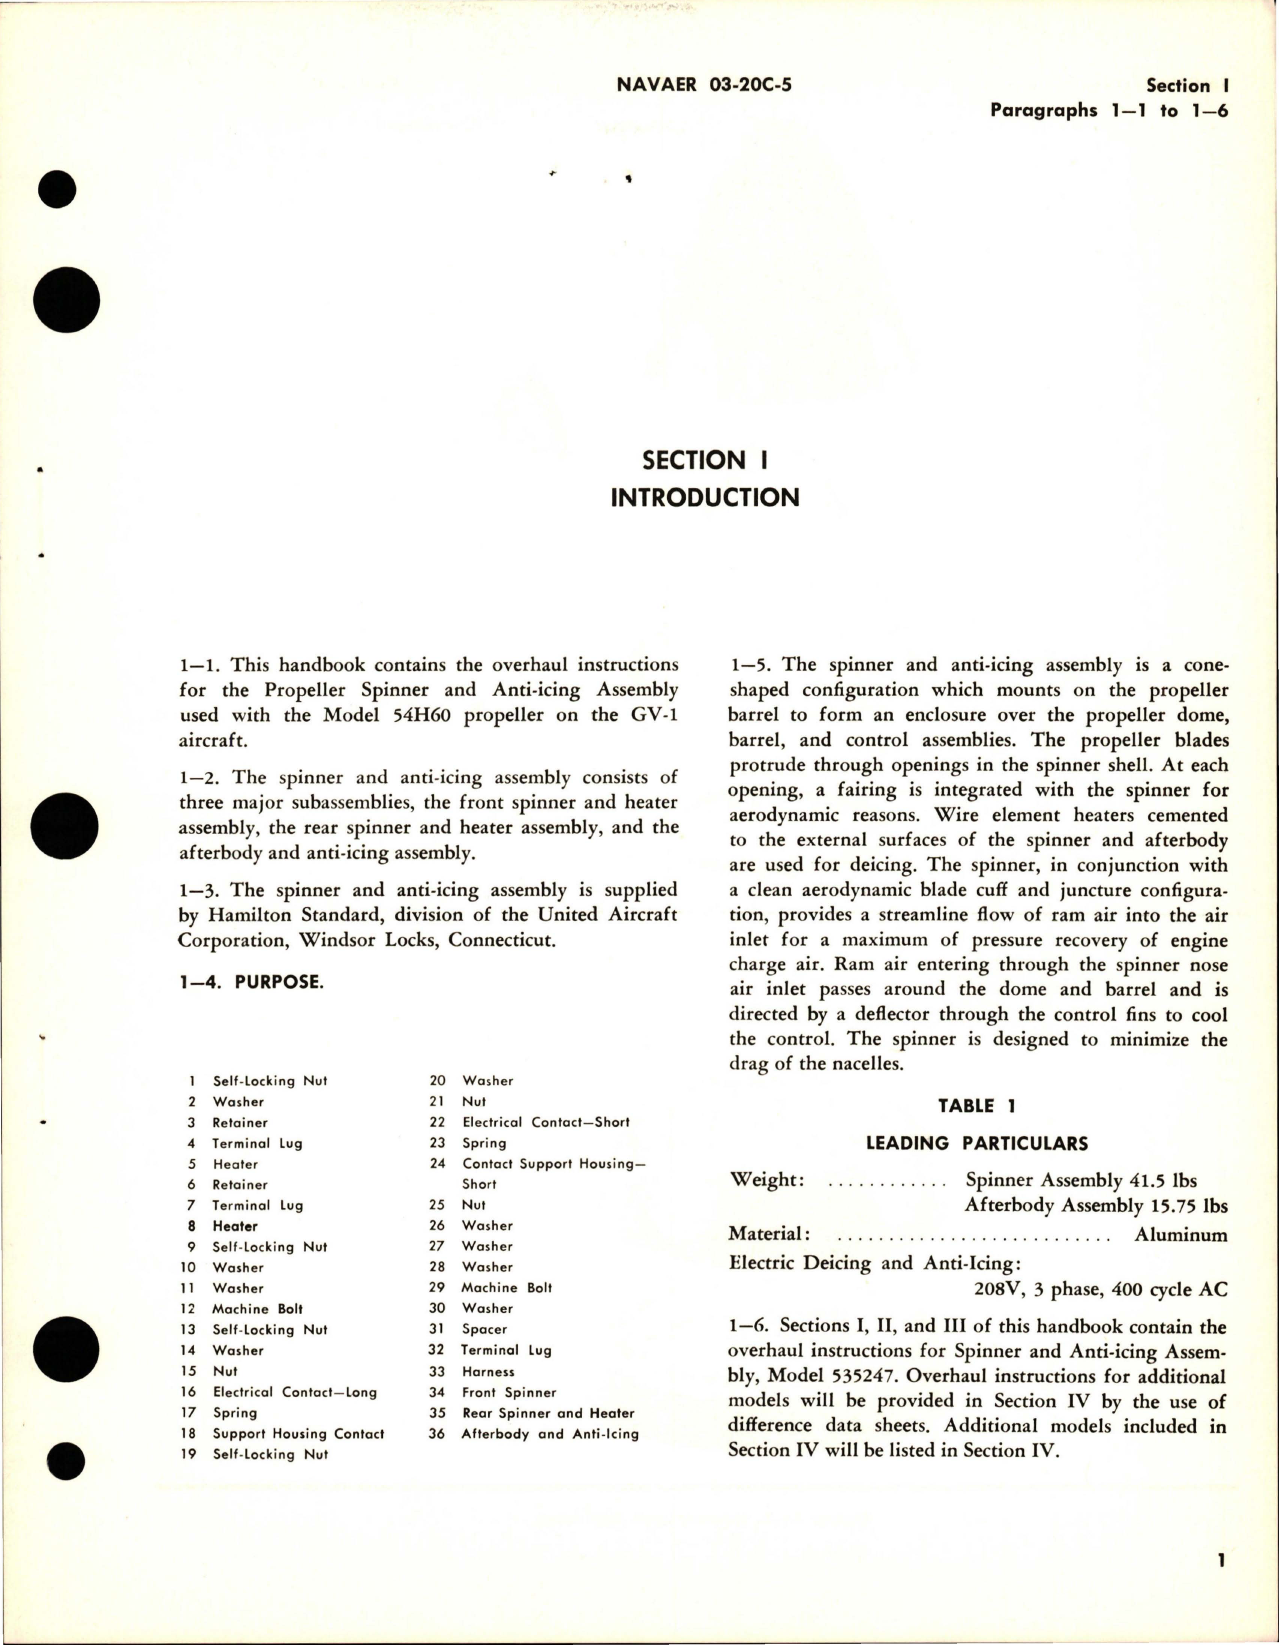 Sample page 5 from AirCorps Library document: Overhaul Instructions for Aircraft Propeller Spinner and Anti-Icing - Assembly 535247 